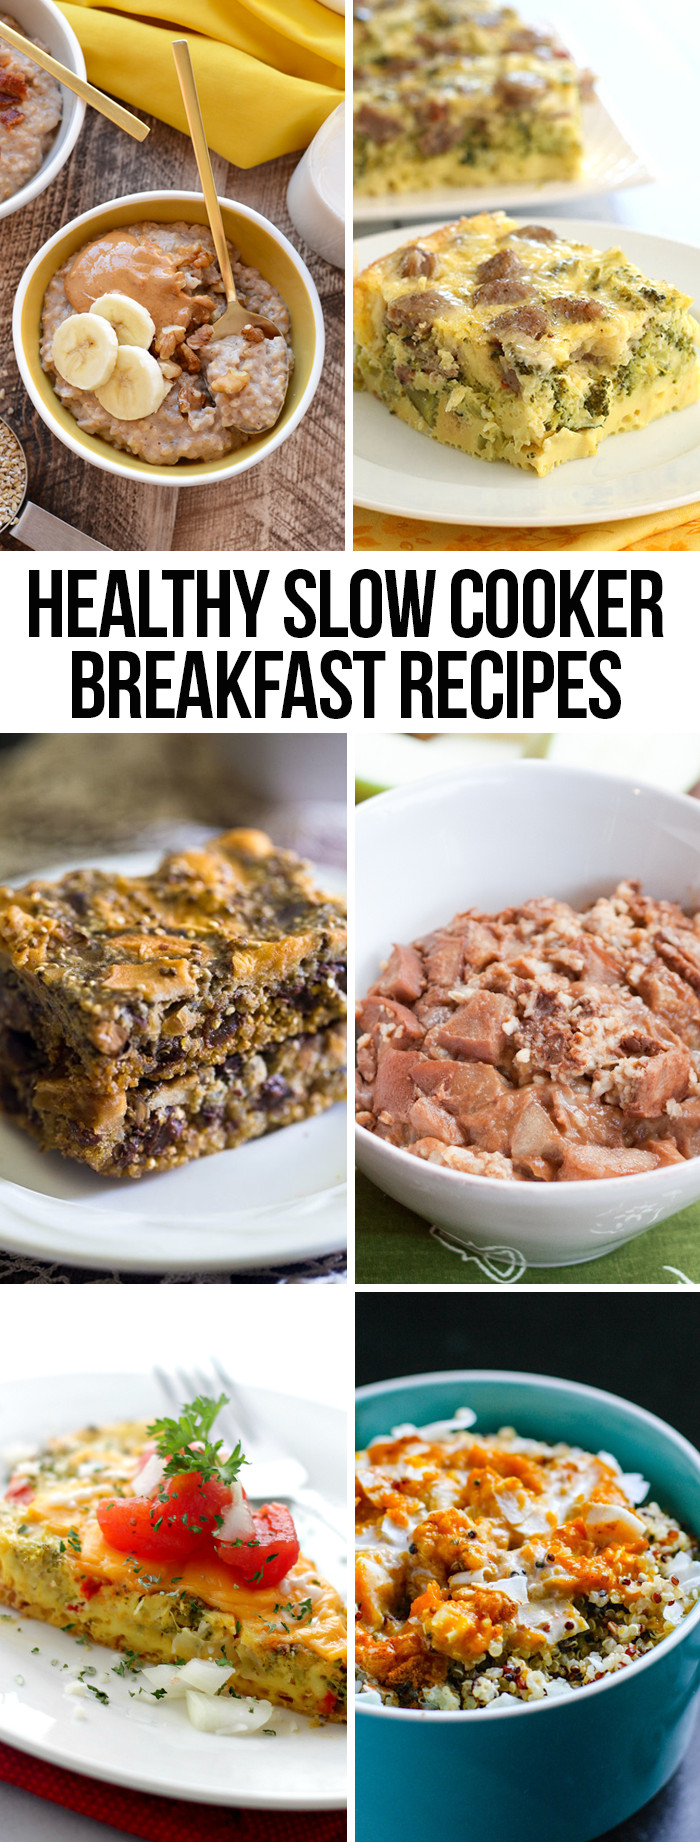 Healthy Easy Slow Cooker Recipes
 Healthy Slow Cooker Breakfast Recipes